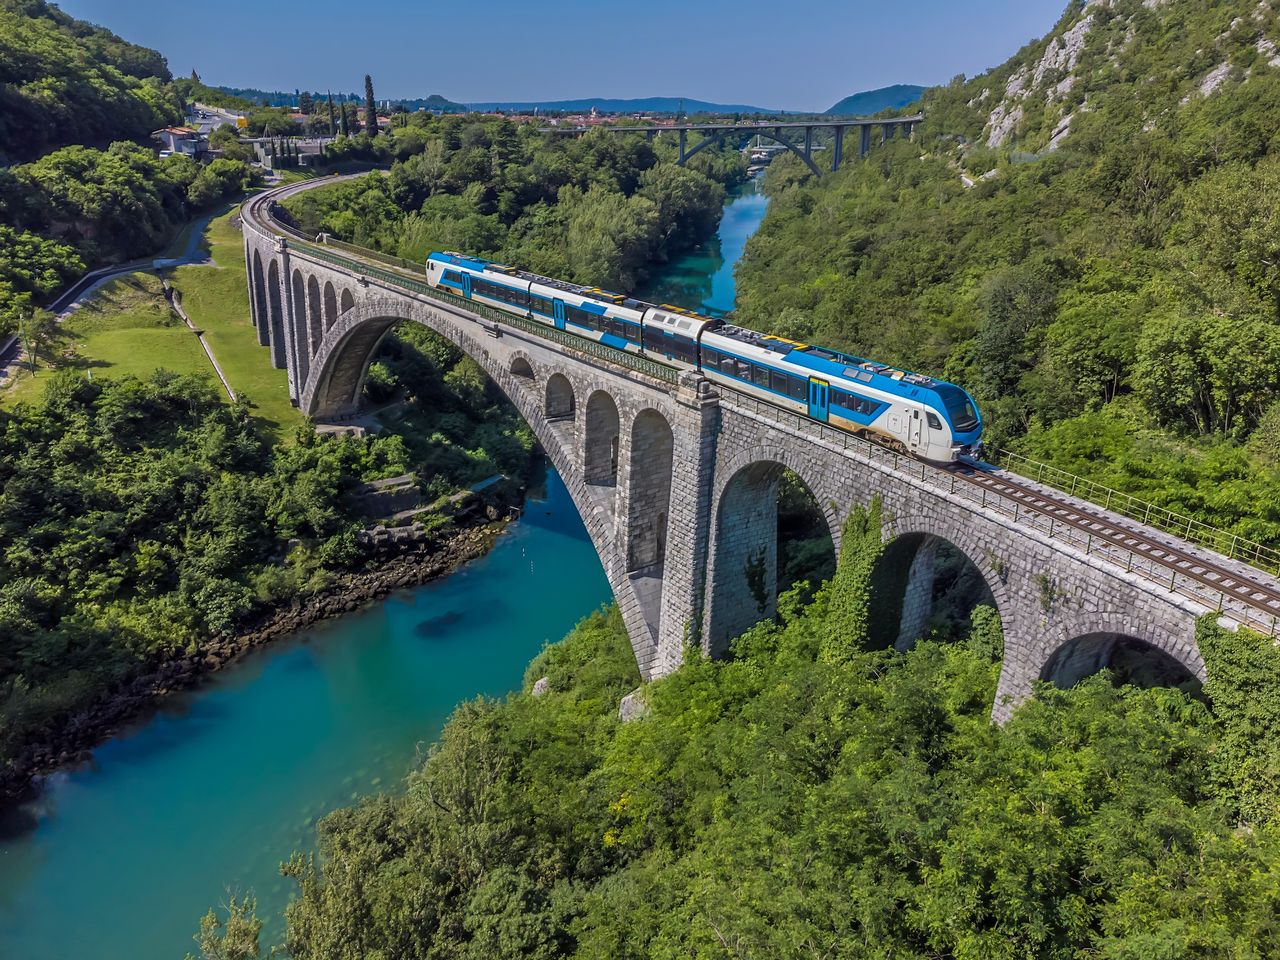 New scenic train route connects European countries: Italy, Slovenia, and Croatia in 2 hours